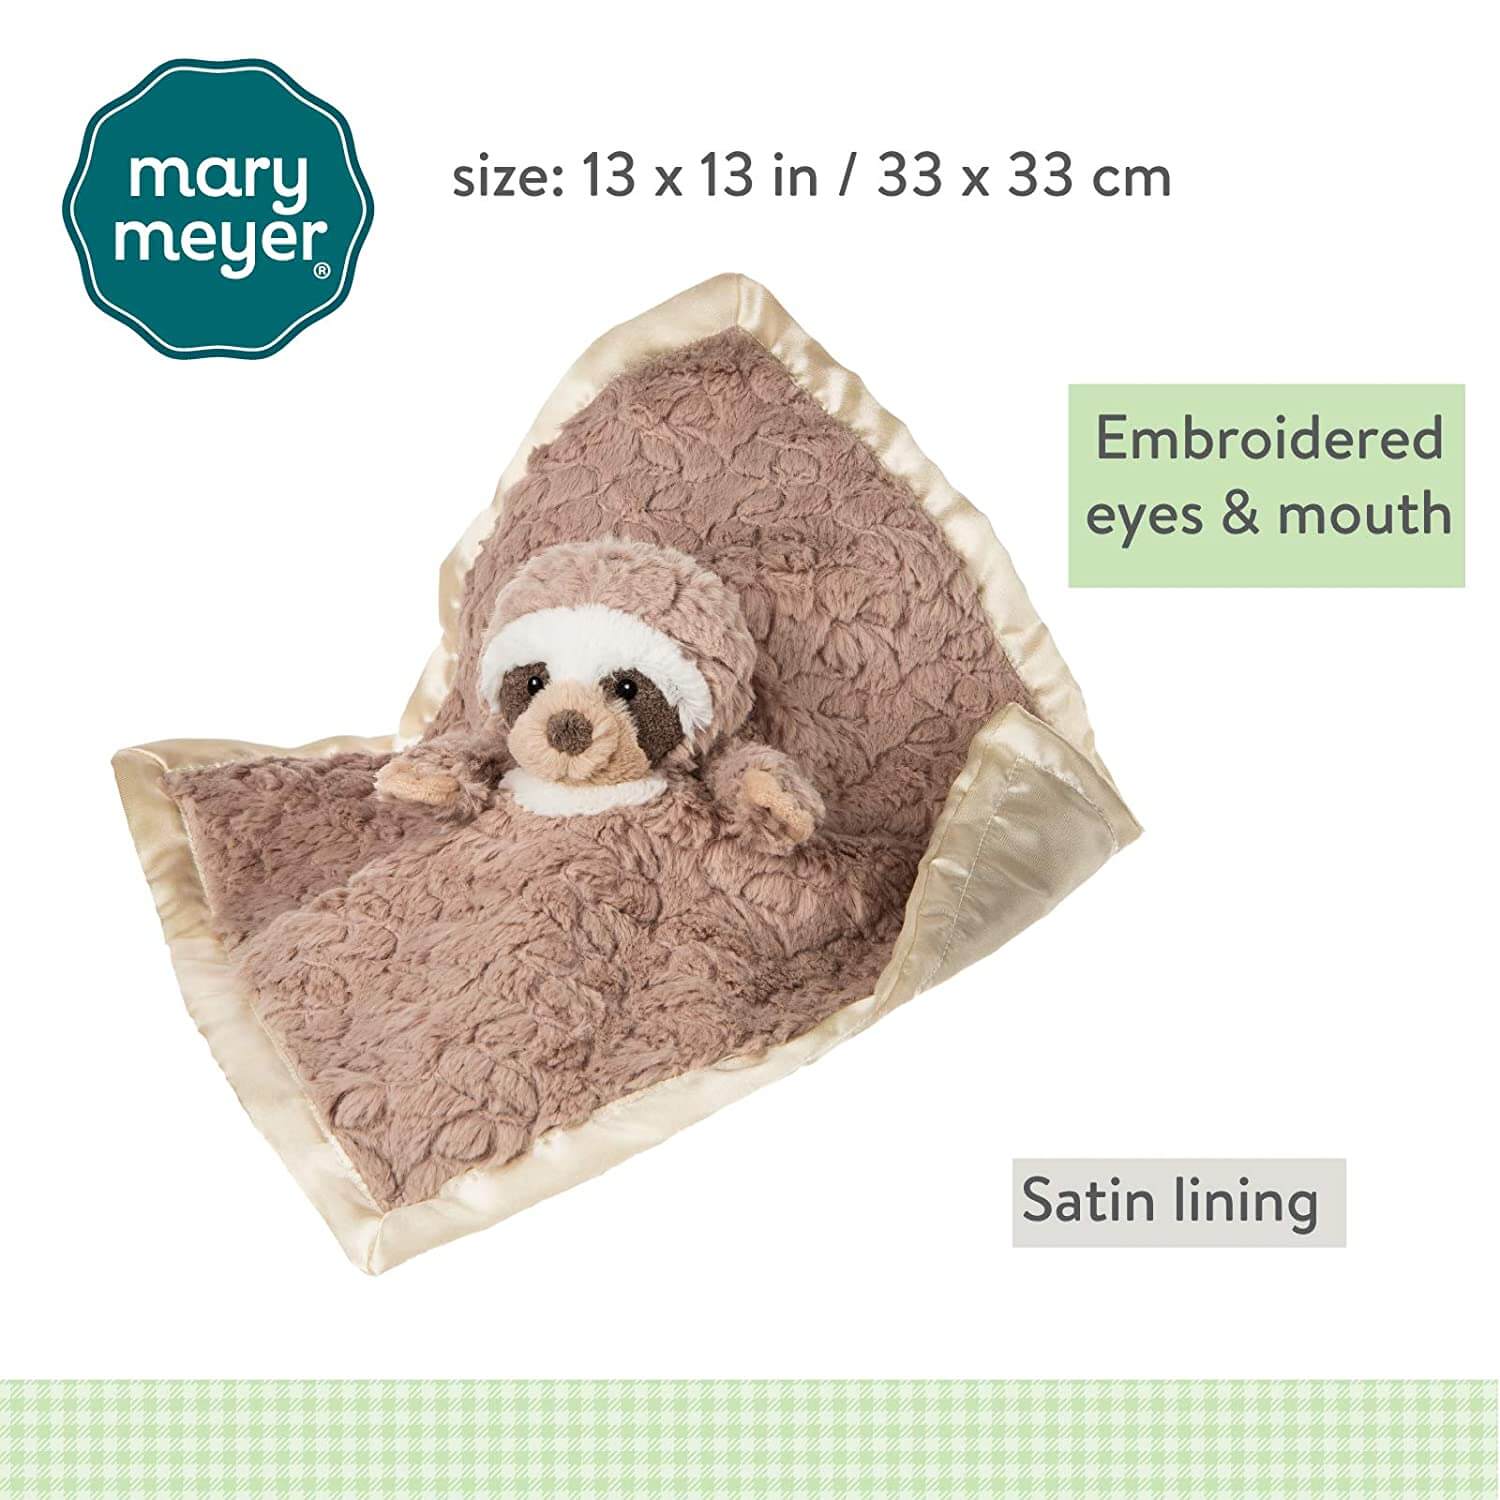 Mary Meyer Putty Nursery Sloth Character Blanket